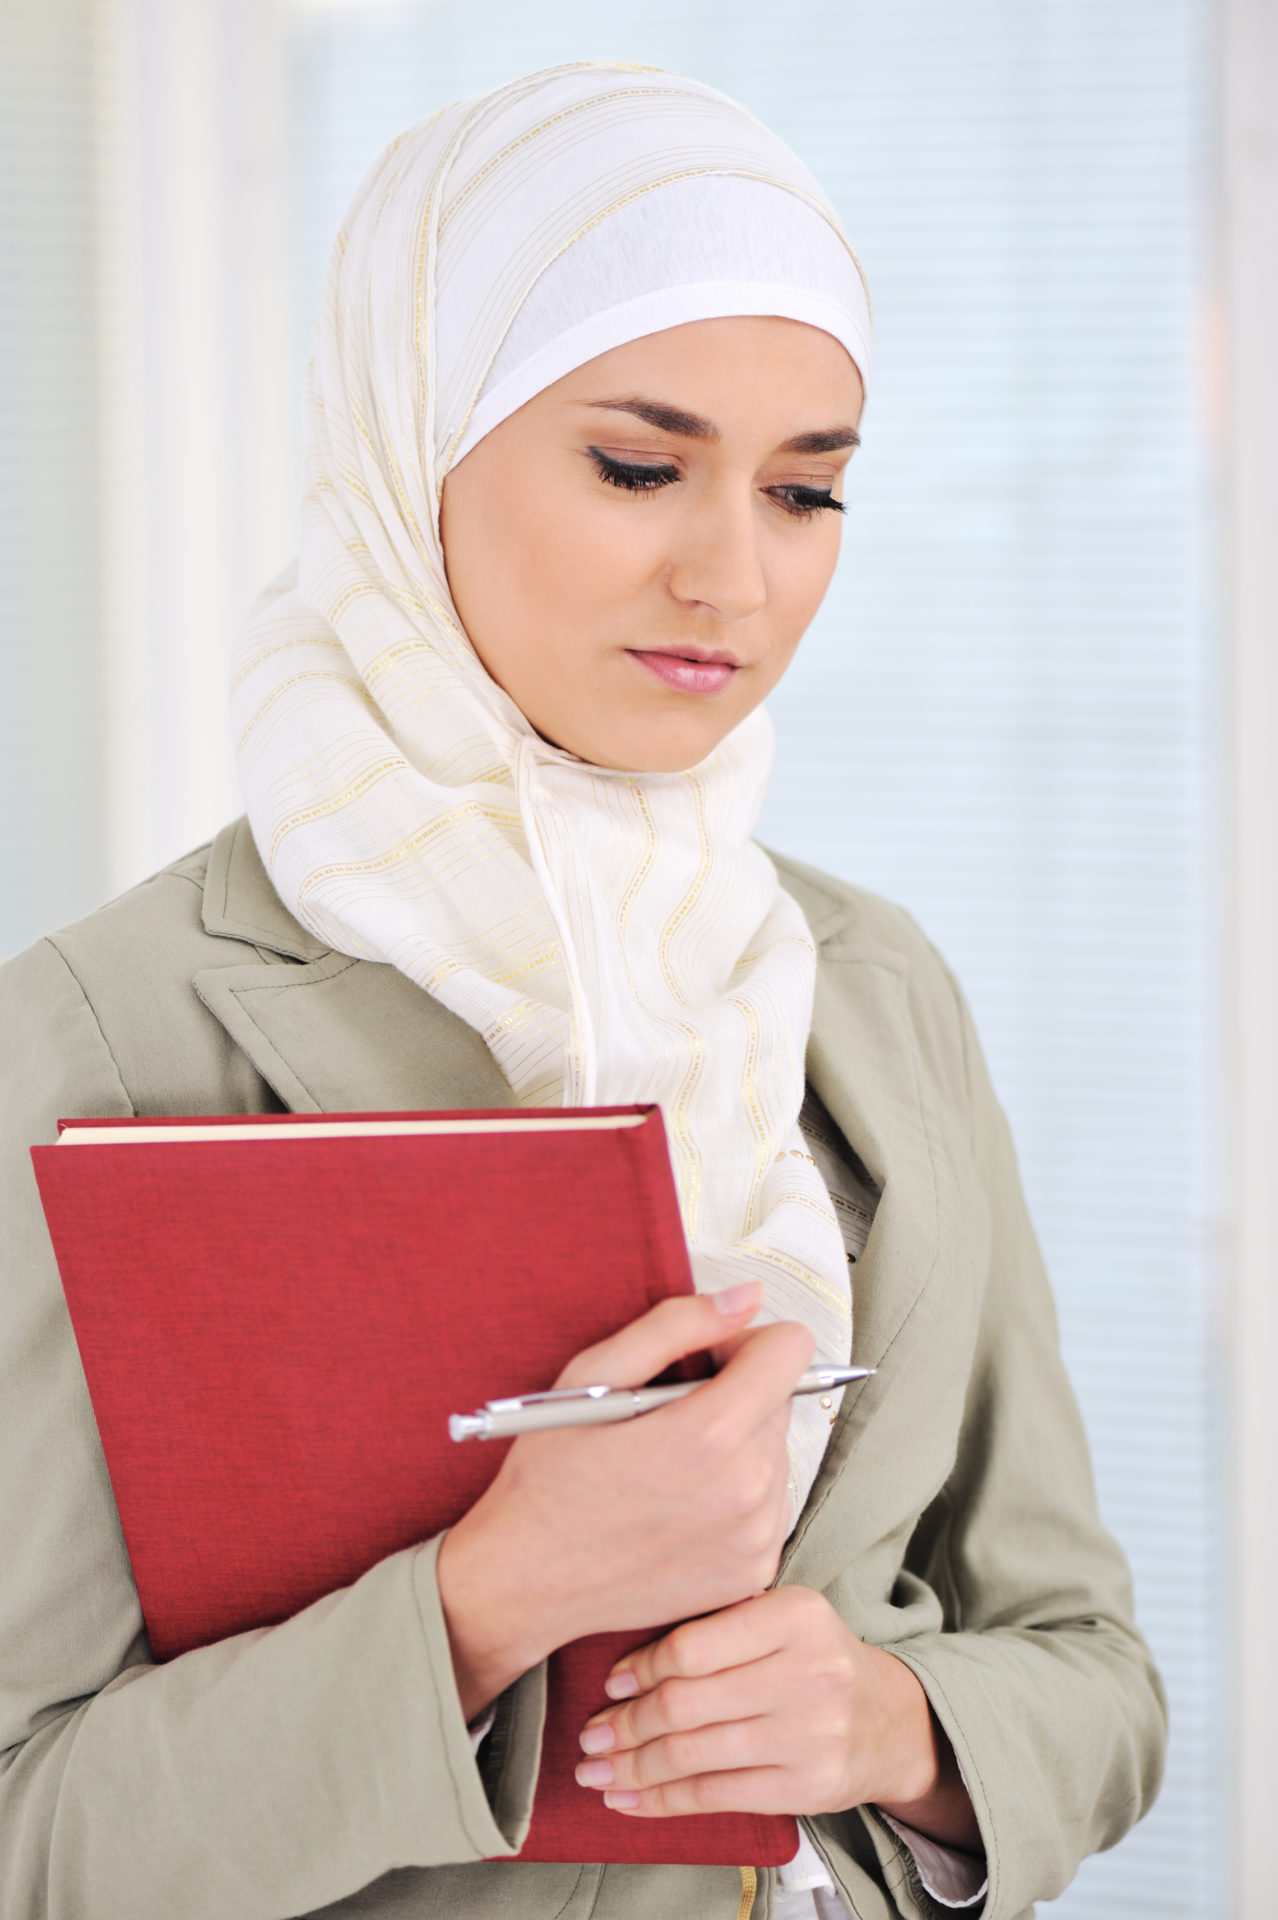 CAIR-OK Action Alert: Thank Library System for Promoting Positive Image of Islam